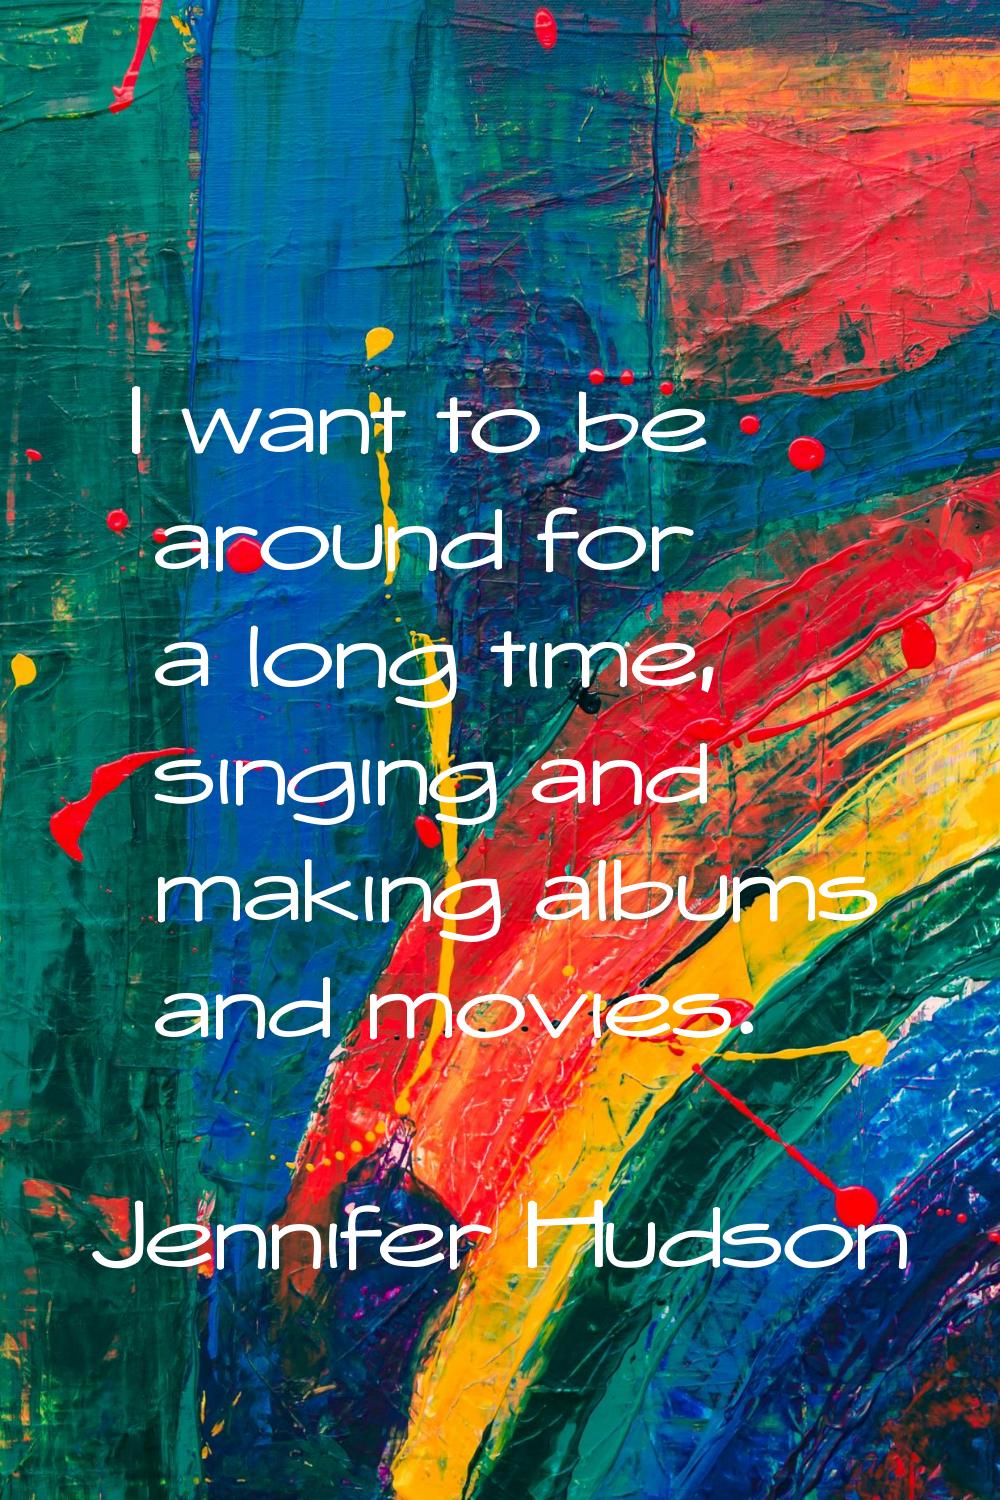 I want to be around for a long time, singing and making albums and movies.